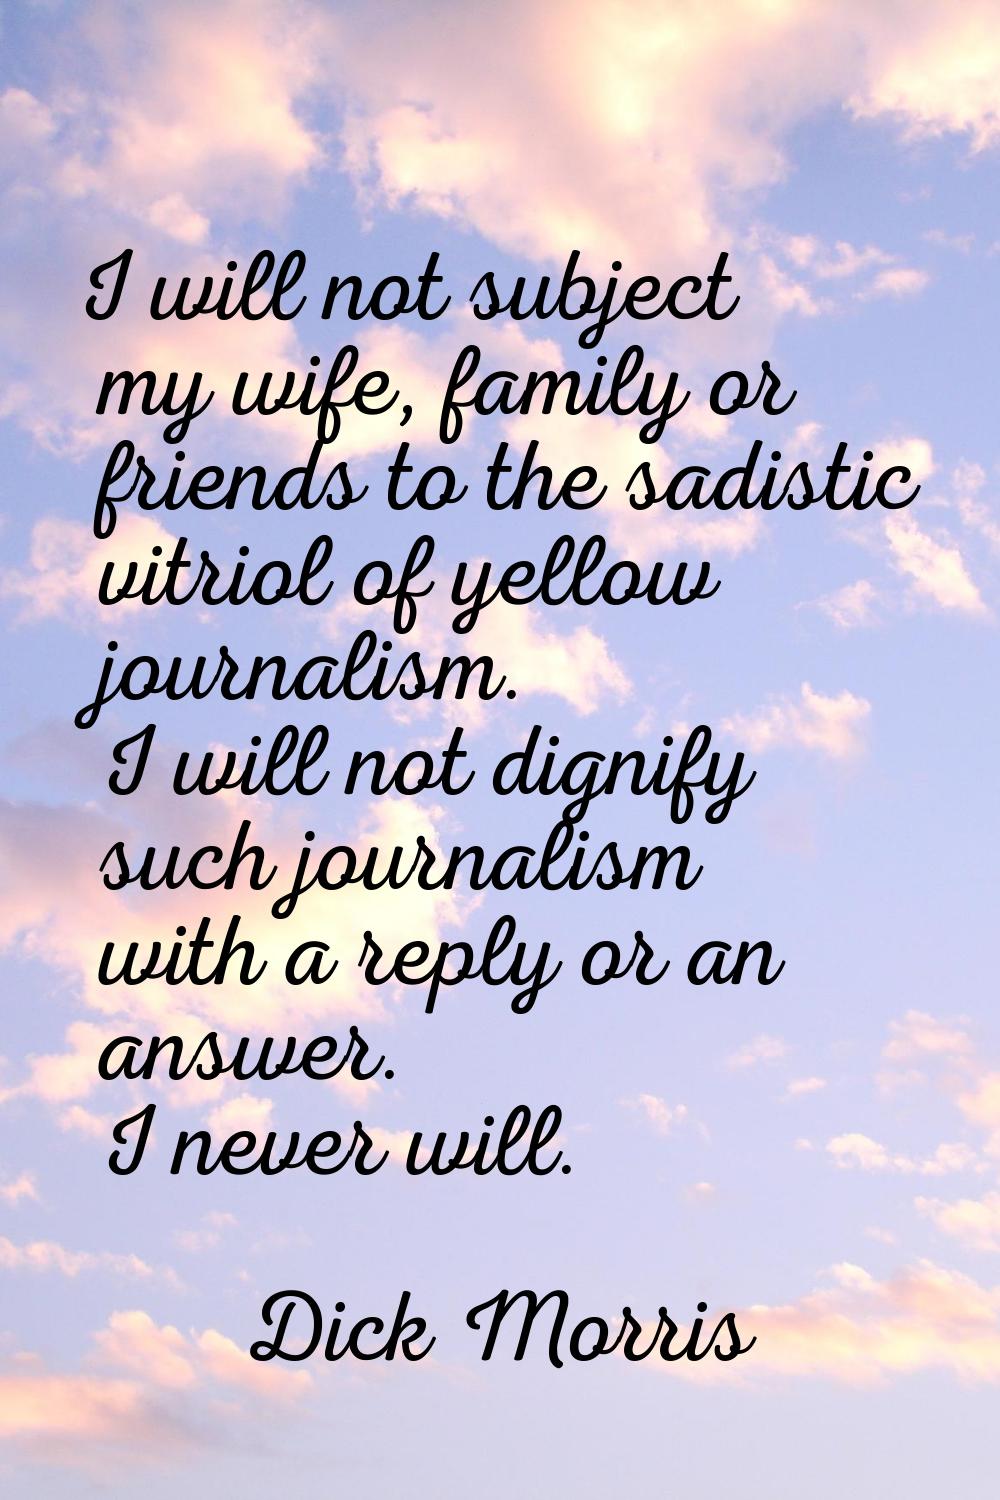 I will not subject my wife, family or friends to the sadistic vitriol of yellow journalism. I will 